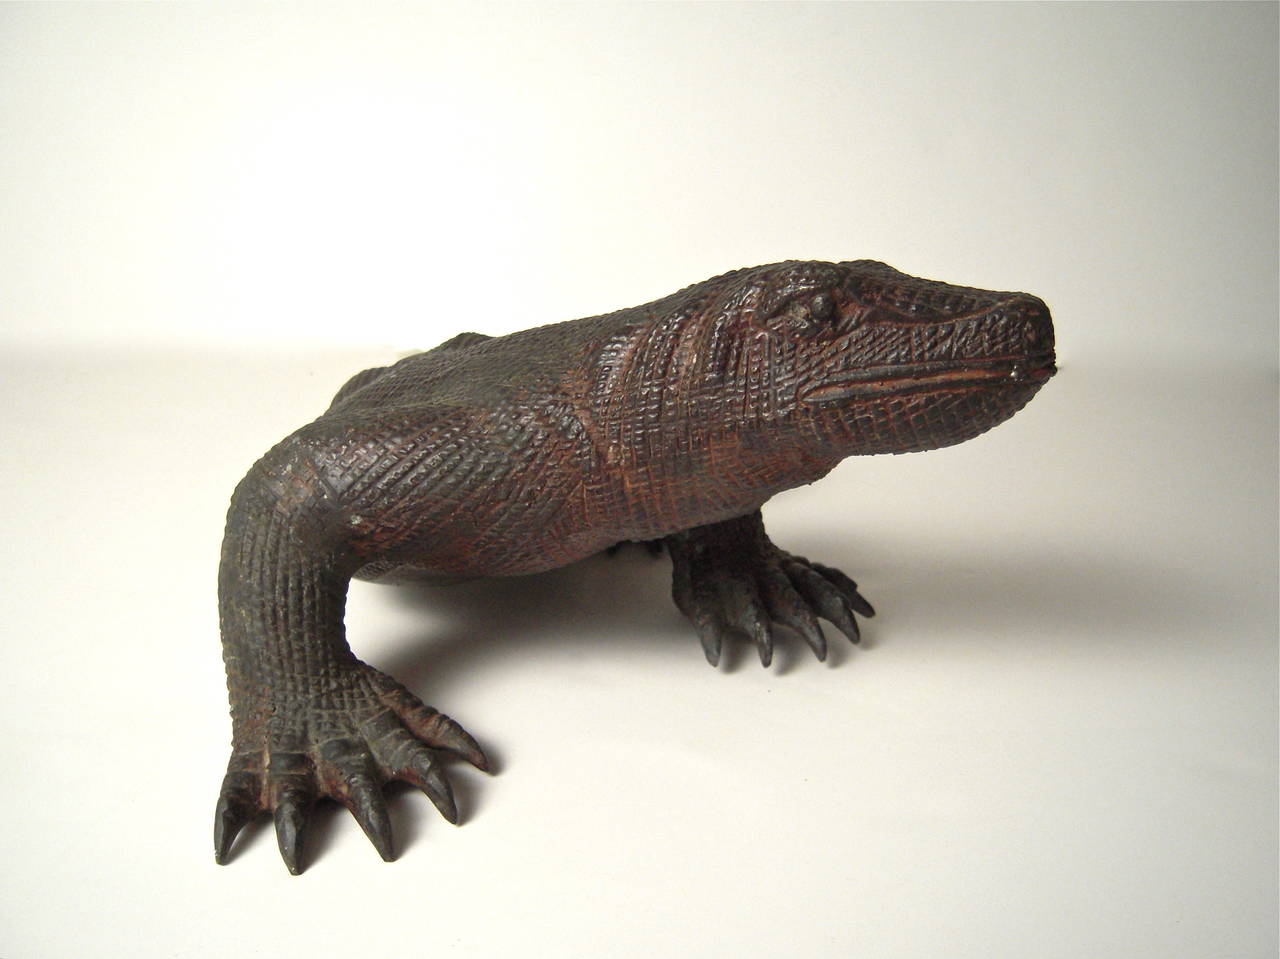 A well modeled, highly naturalistic, sculpture of a Komodo dragon, handmade in copper or copper alloy. Very realistic, with good age and patina.

Dimensions:

Height: 5 1/2